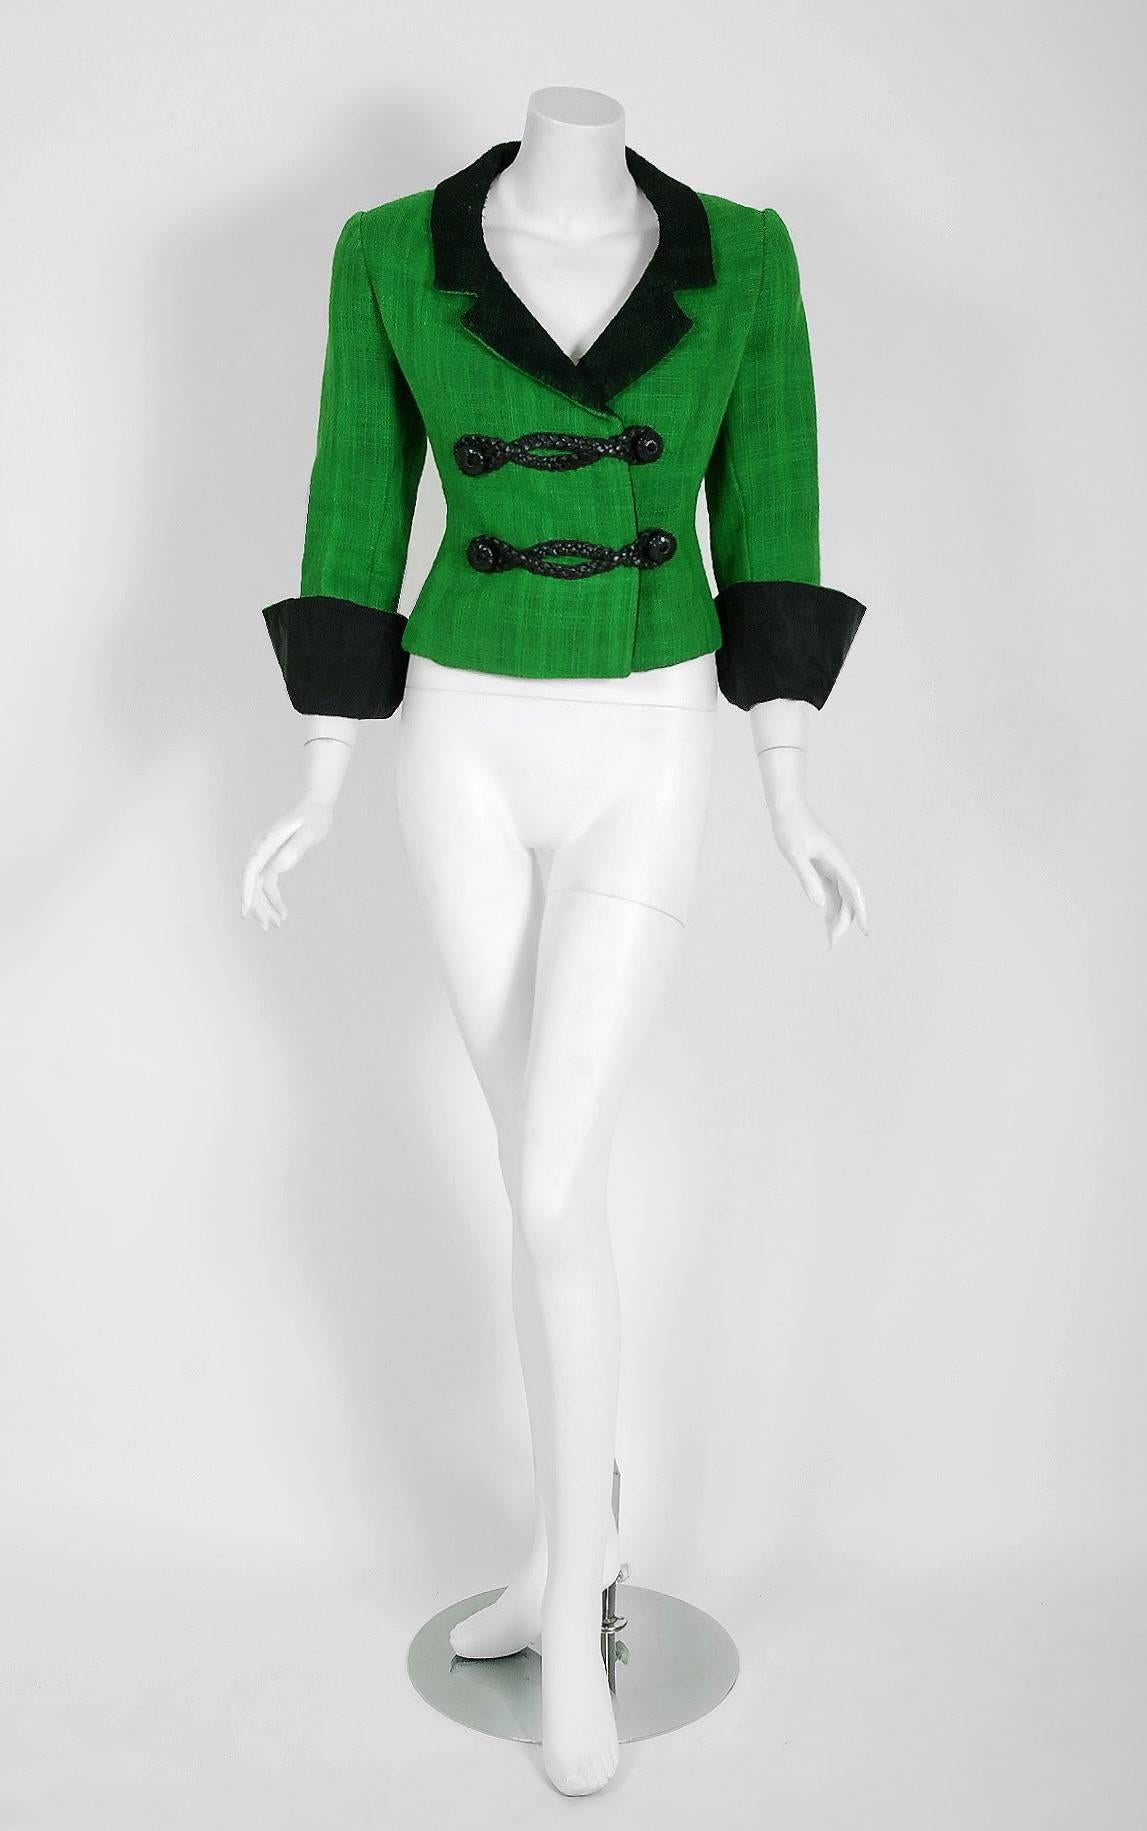 The House of Dior has been an enduring icon of Haute Couture. When the talented Marc Bohan took over as head designer in 1960, he continued the Dior tradition of elegant design. This gorgeous green and black documented jacket from his 1964